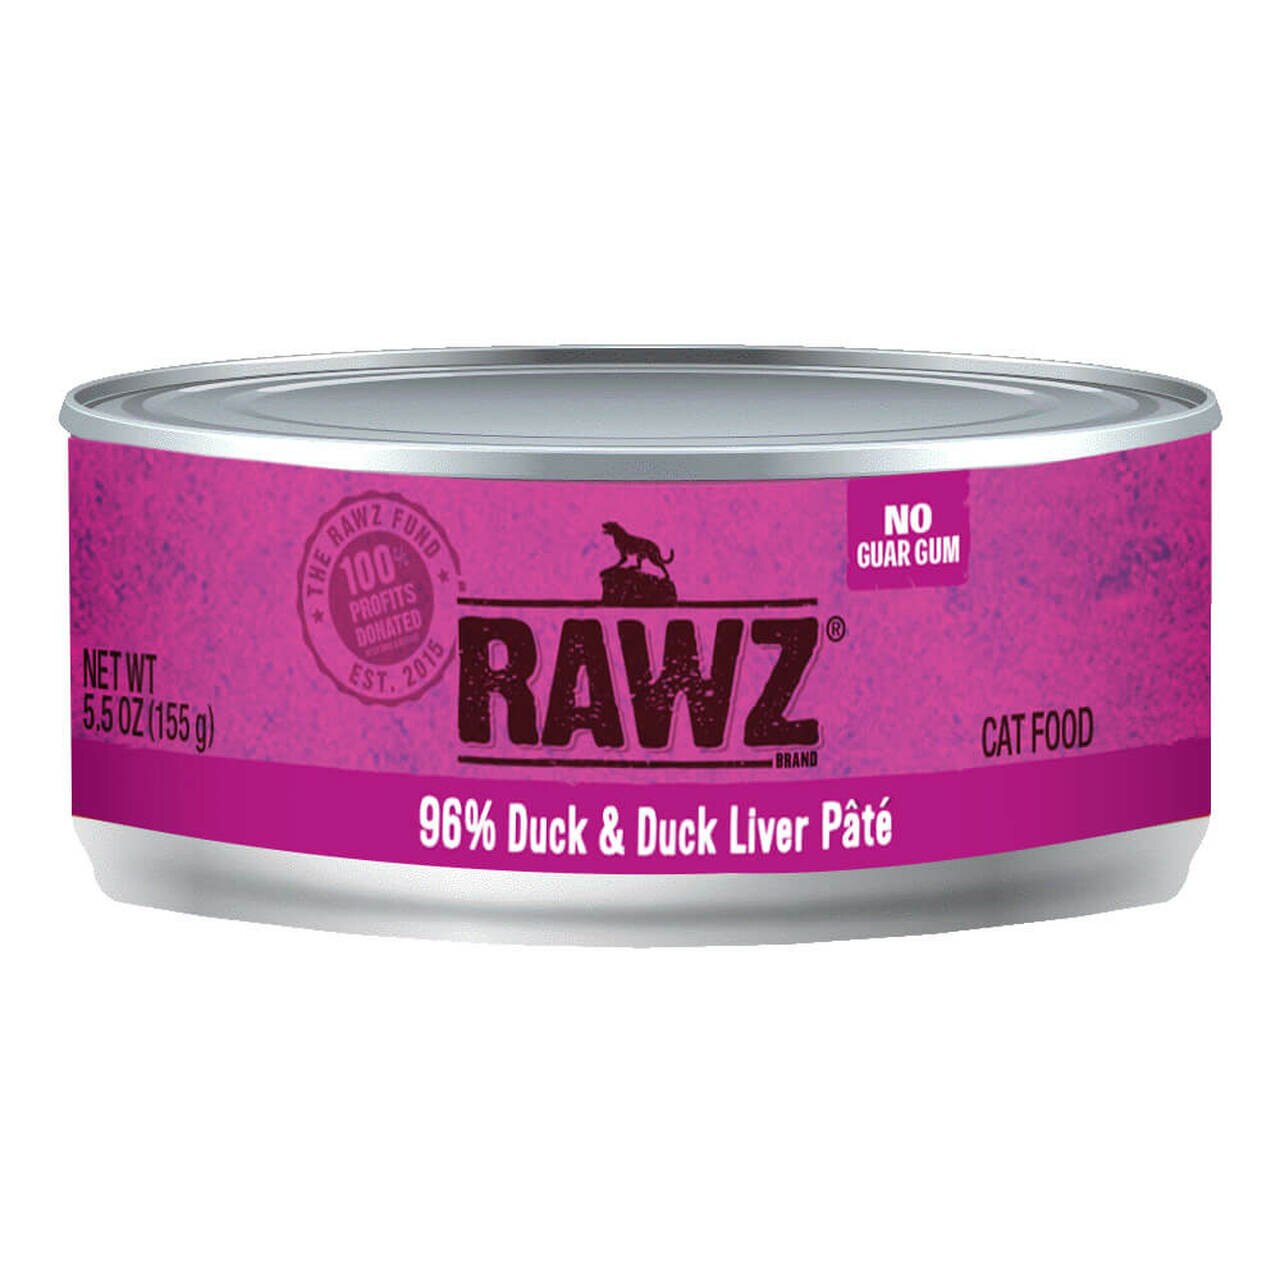 RAWZ 96% Duck & Duck Liver Pate Canned Cat Food 24-Pack 5.5oz